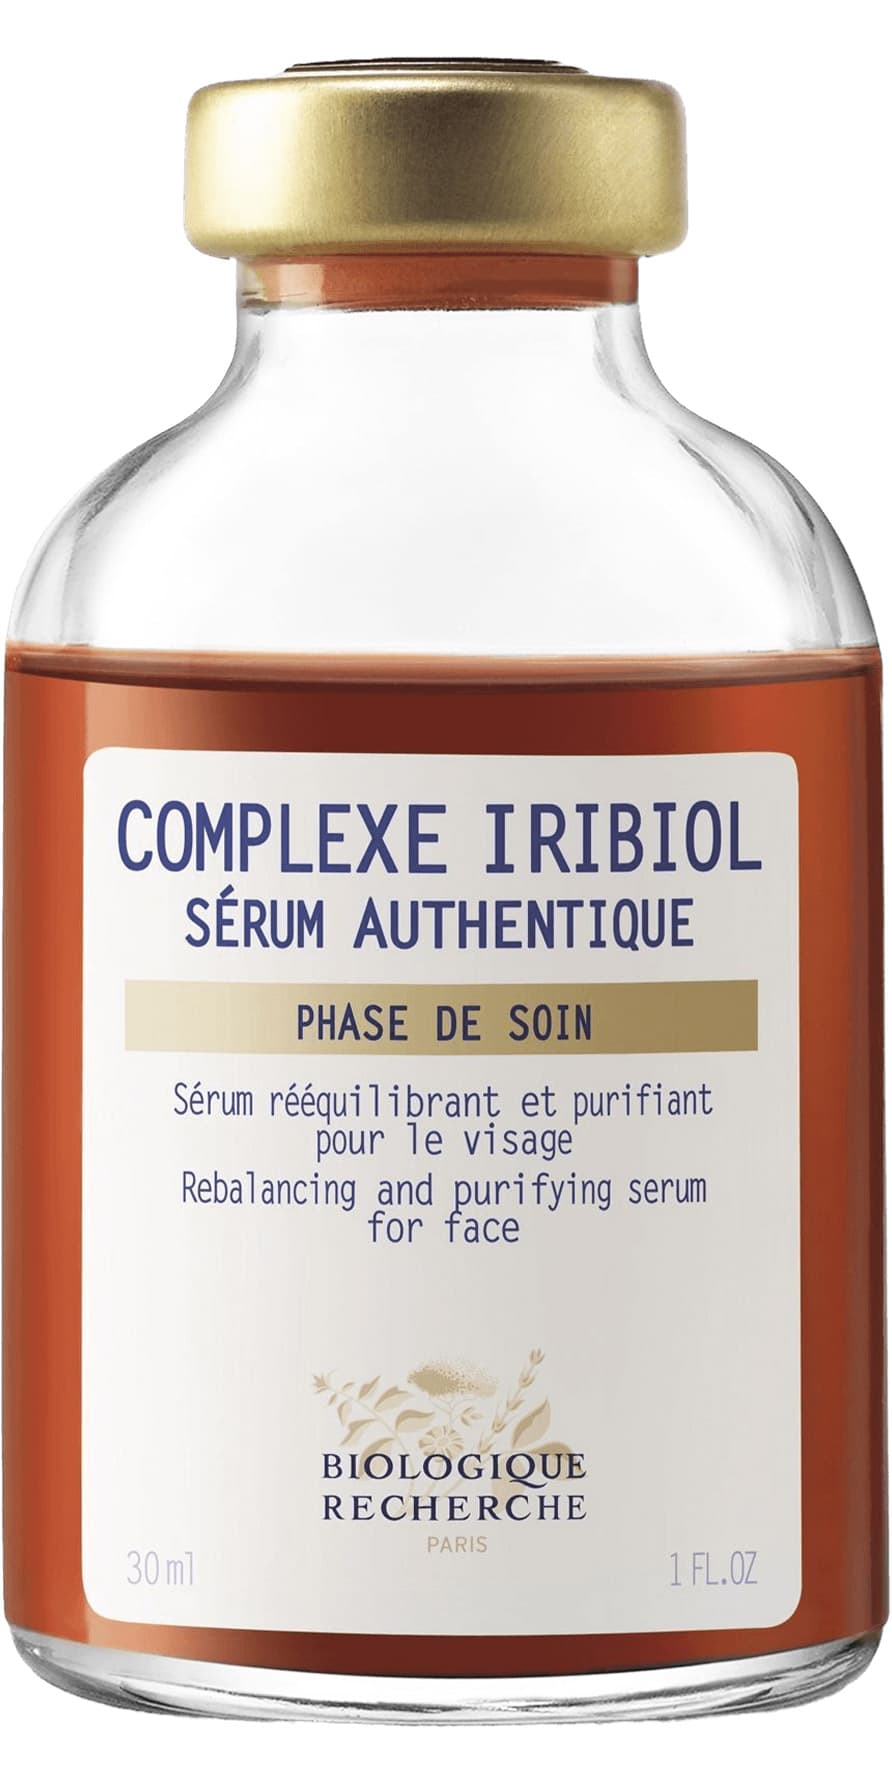 variant-30ml-product-page-image